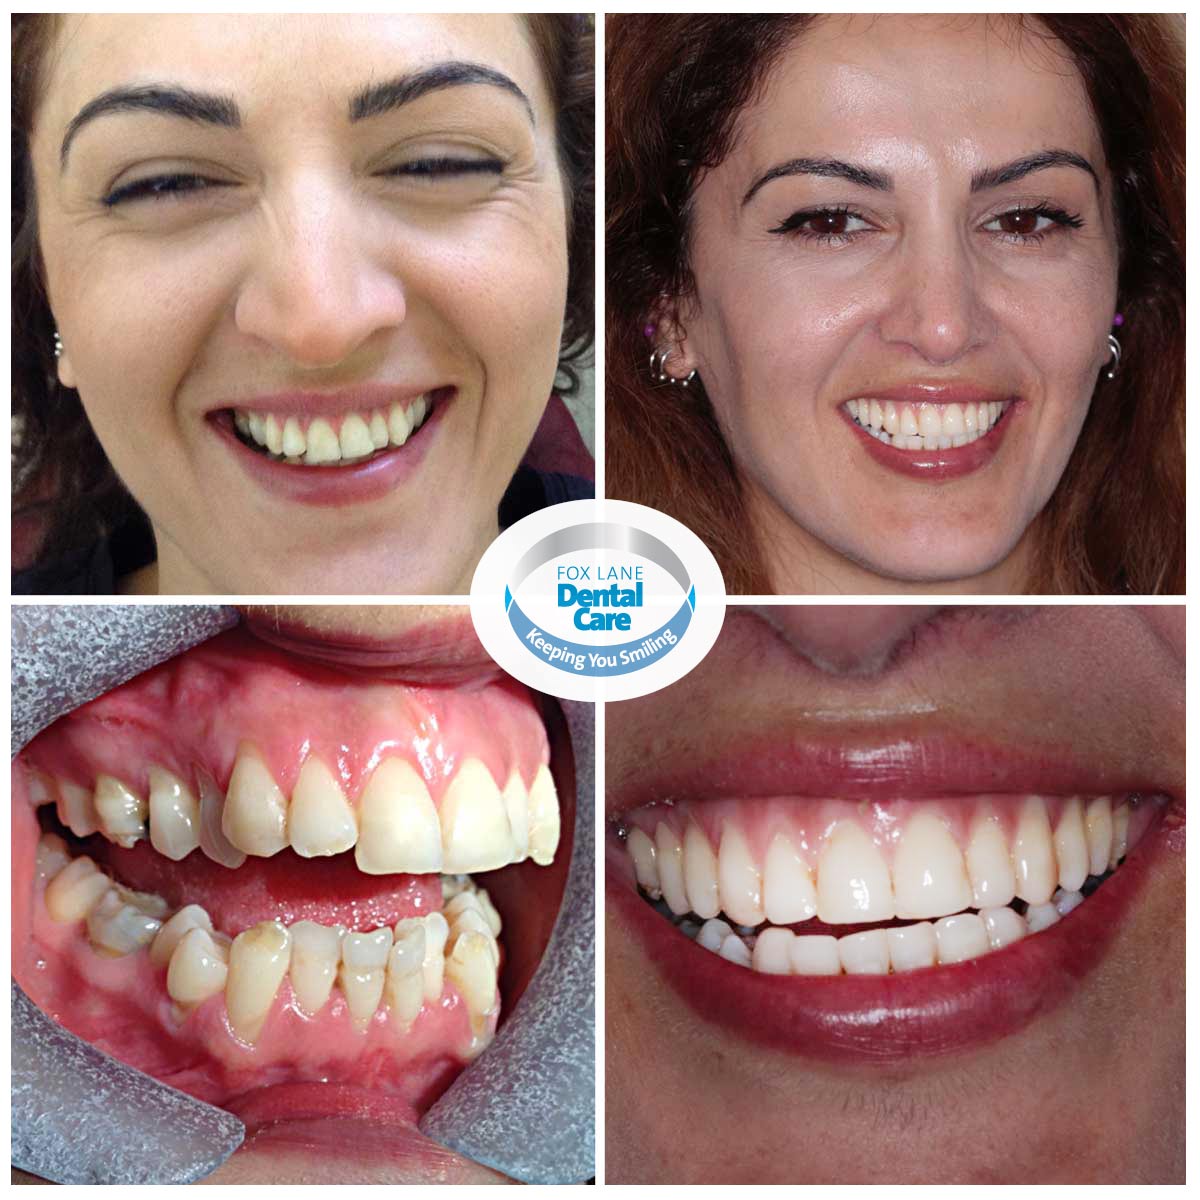 3-before-after-orthodontics-smile-makeovers - Fox Lane ...